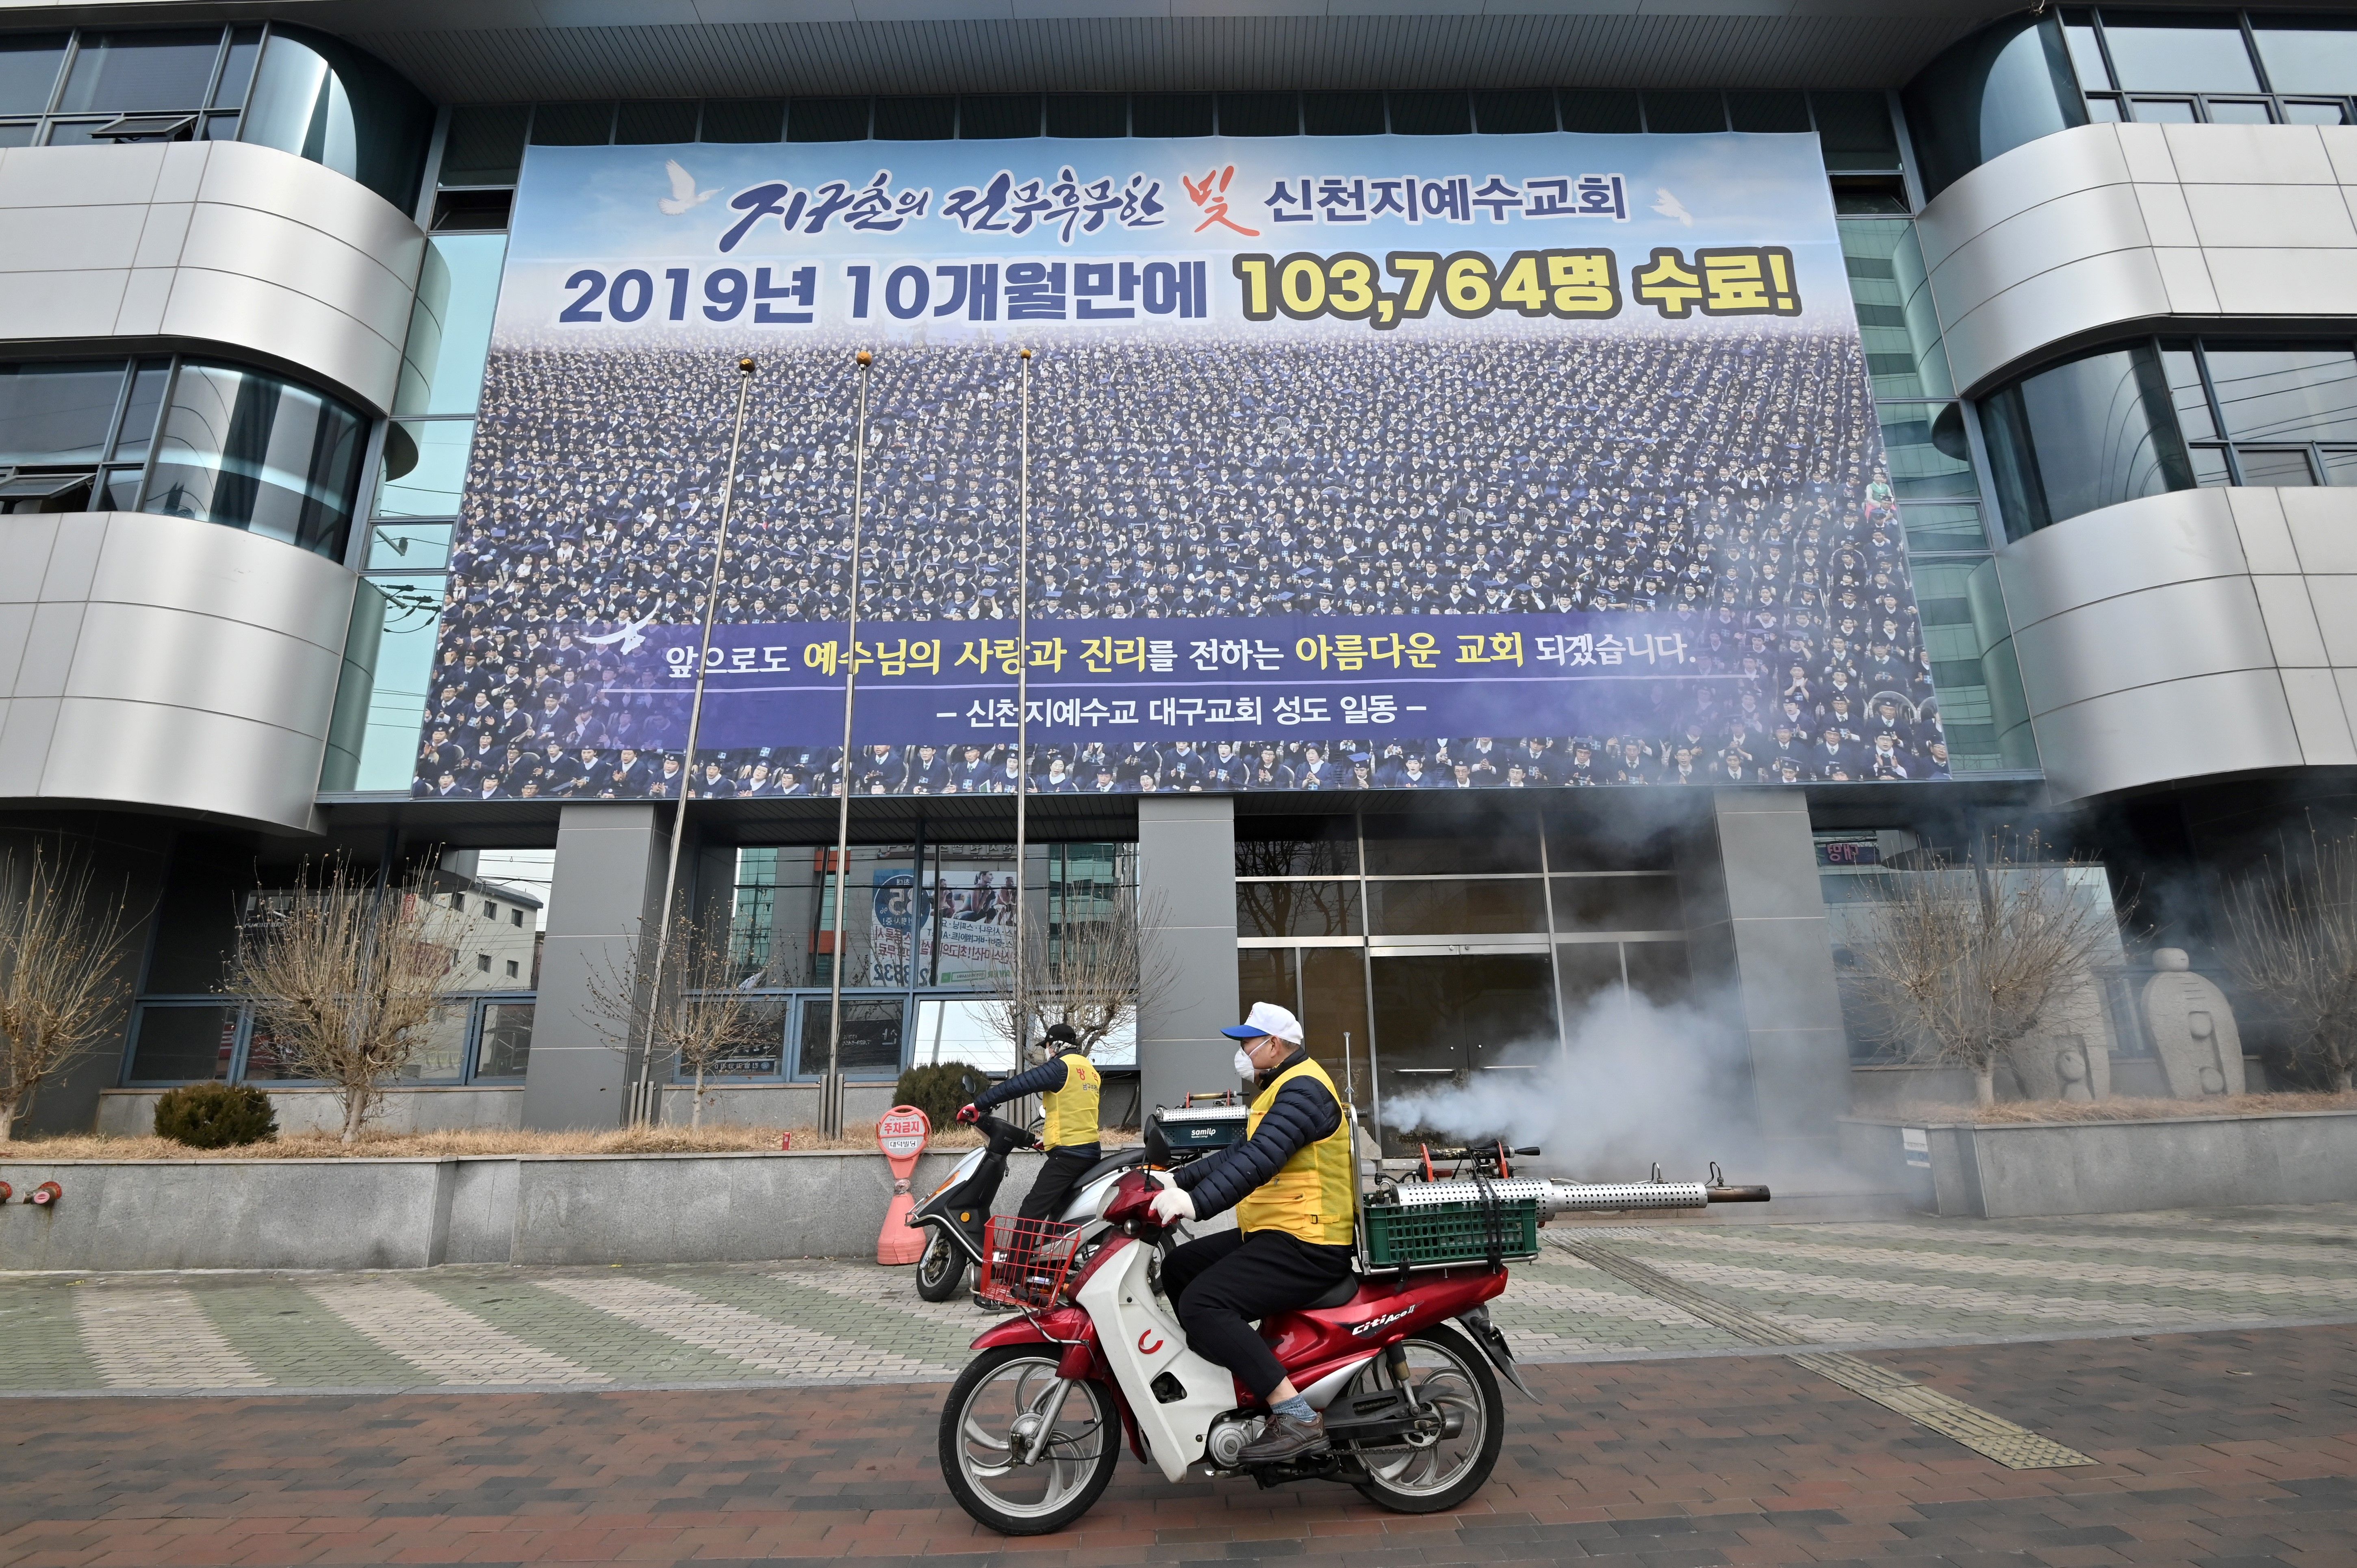 South Korean health officials spray disinfectant in front of the Daegu branch of the Shincheonji religious group in the southeastern city of Daegu.